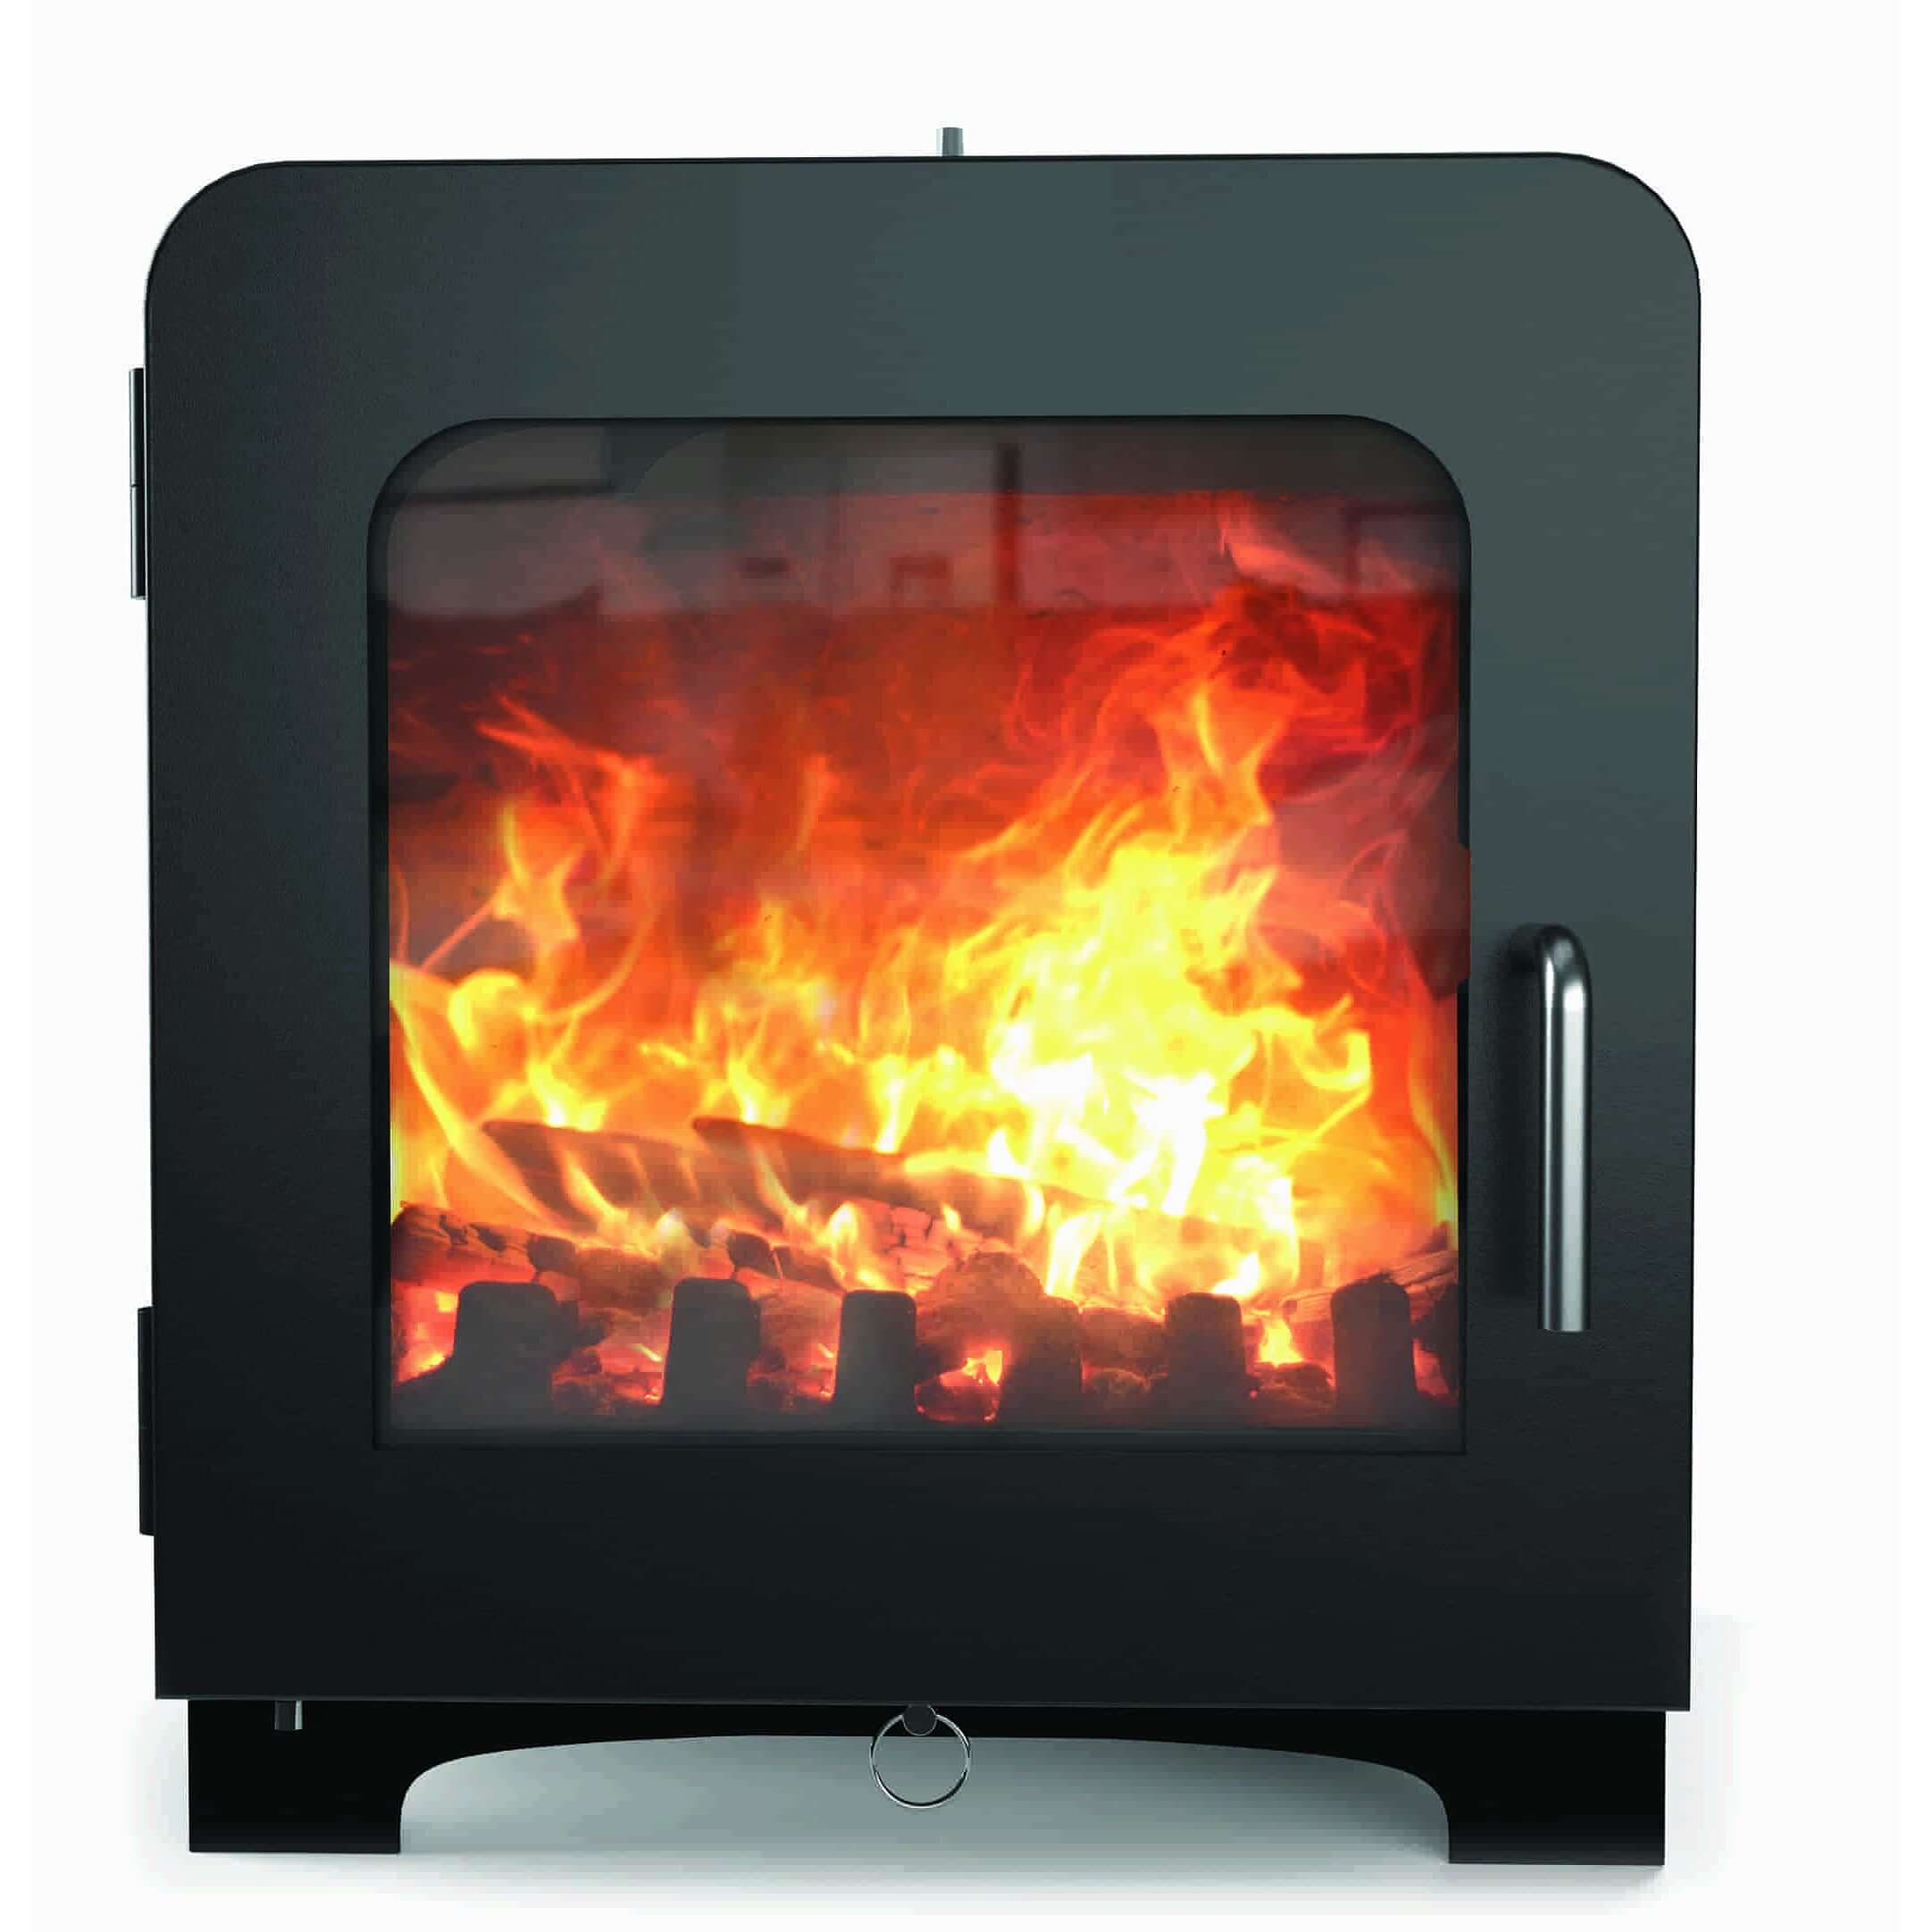 Saltfire ST-4 Multifuel Stove - Glowing Flame